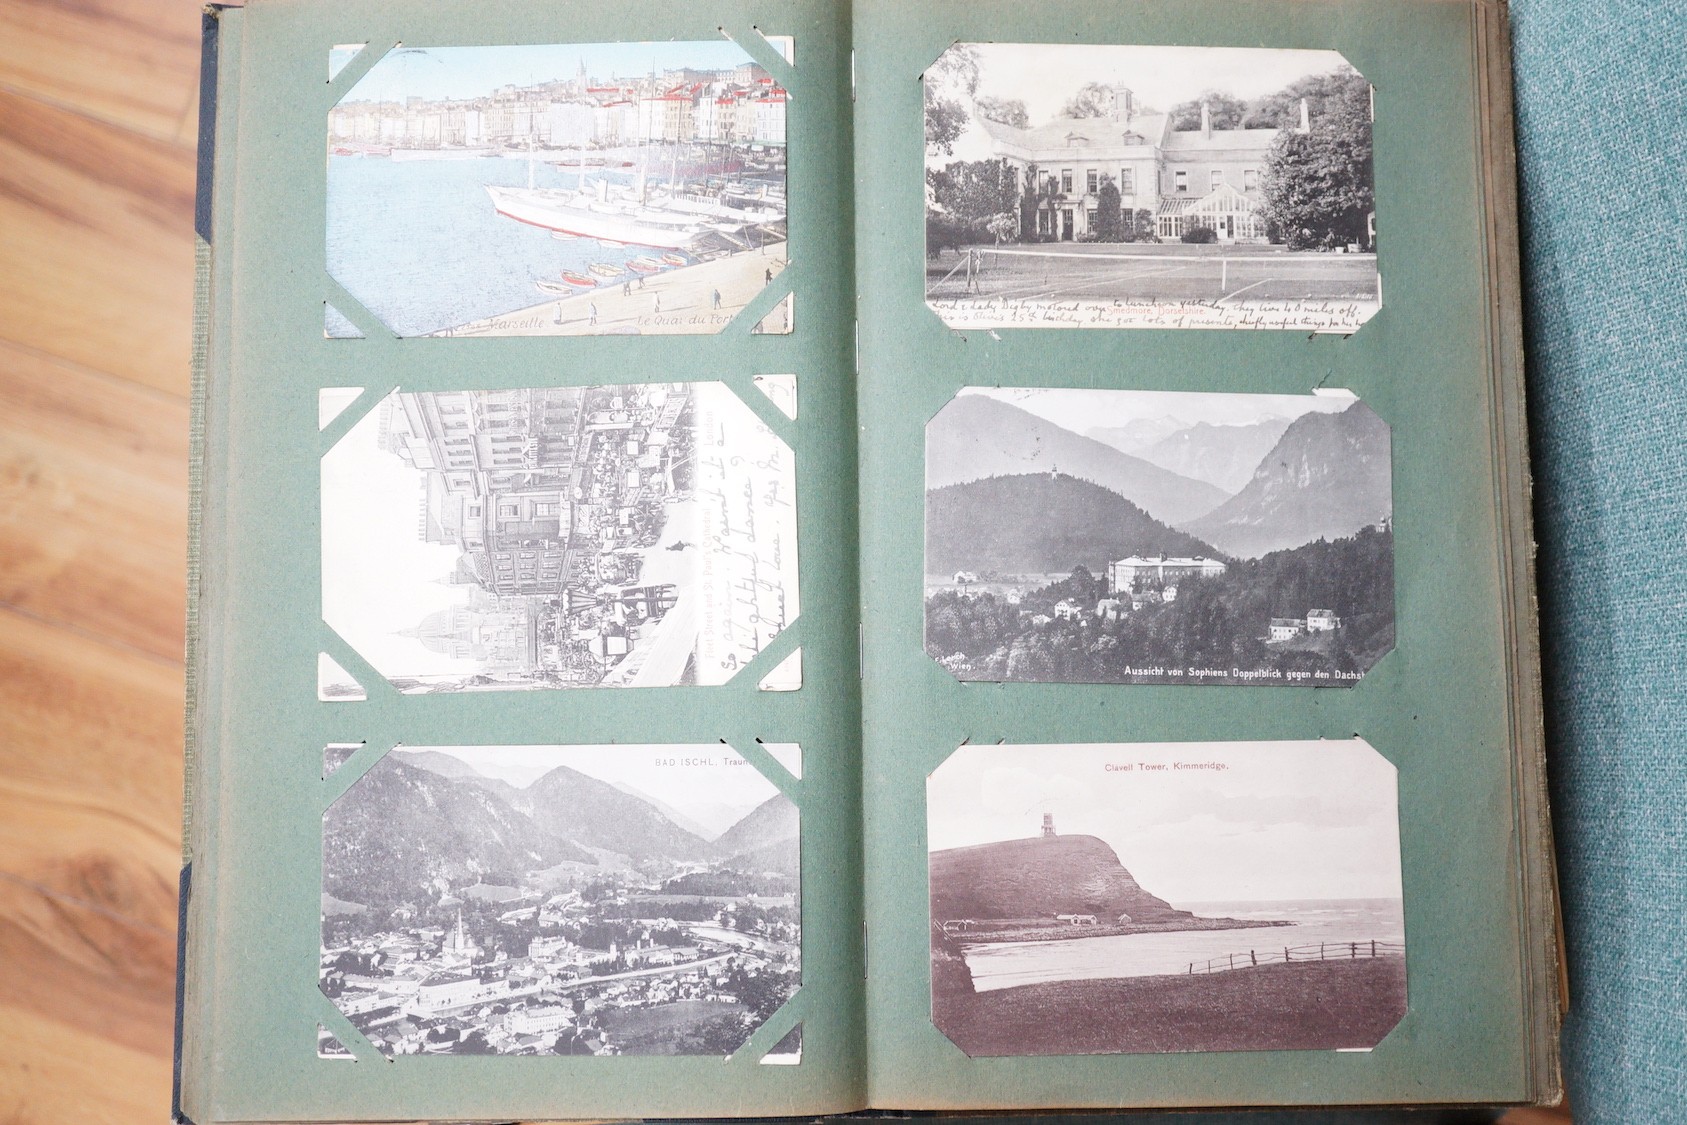 An Edwardian Postcard album collected and mainly received by Muriel MacGeagh following a World tour by her brother, Col. Sir Henry F. MacGeagh and an unknown companion, during 1906, including views of some of the worlds